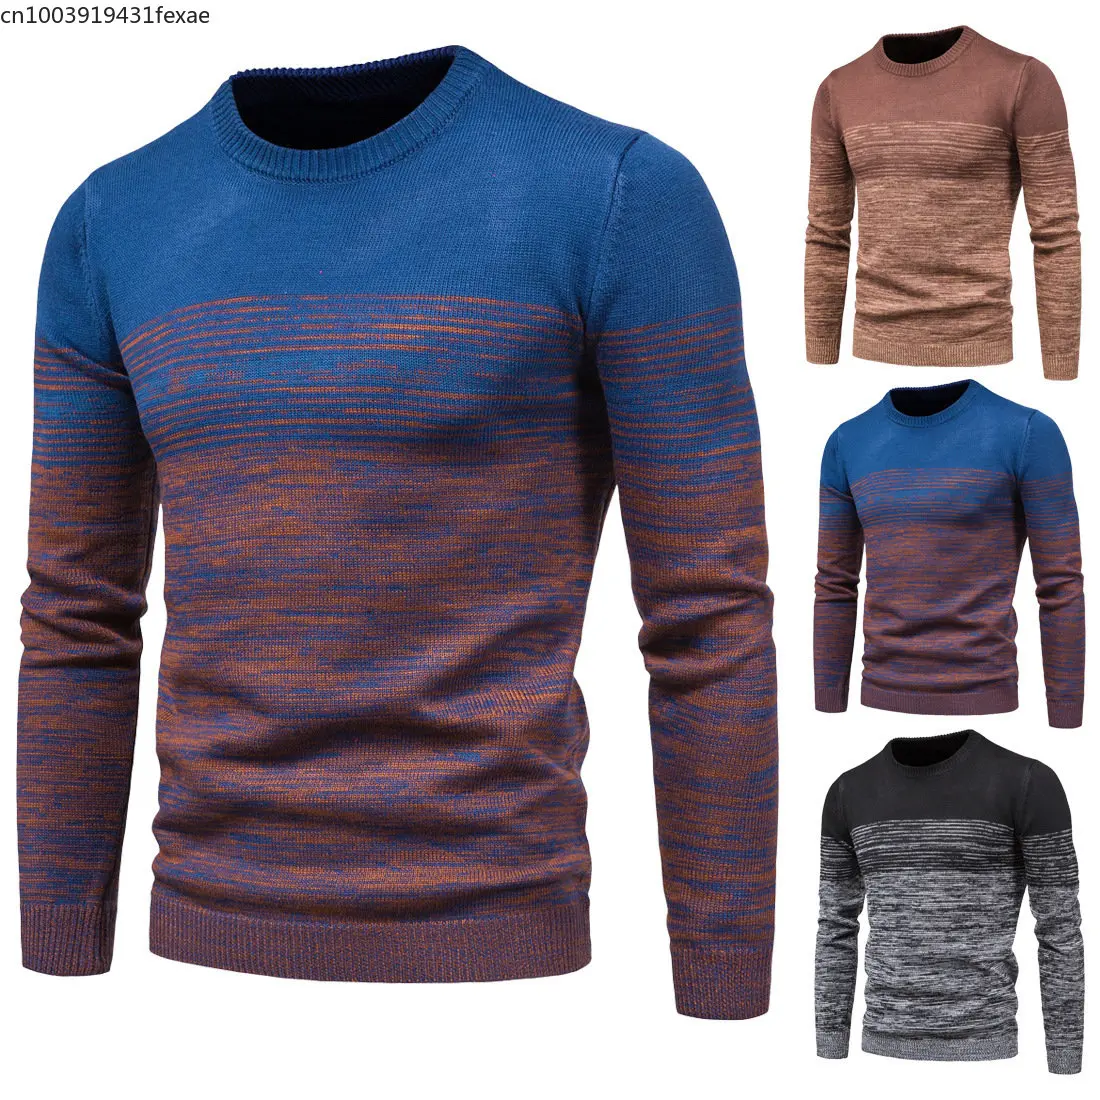 

New Autumn Men's Knitwear Hedging Round Neck Variegated Contrast Fashion Base Sweater Male Tops sweater daily basic autumn top